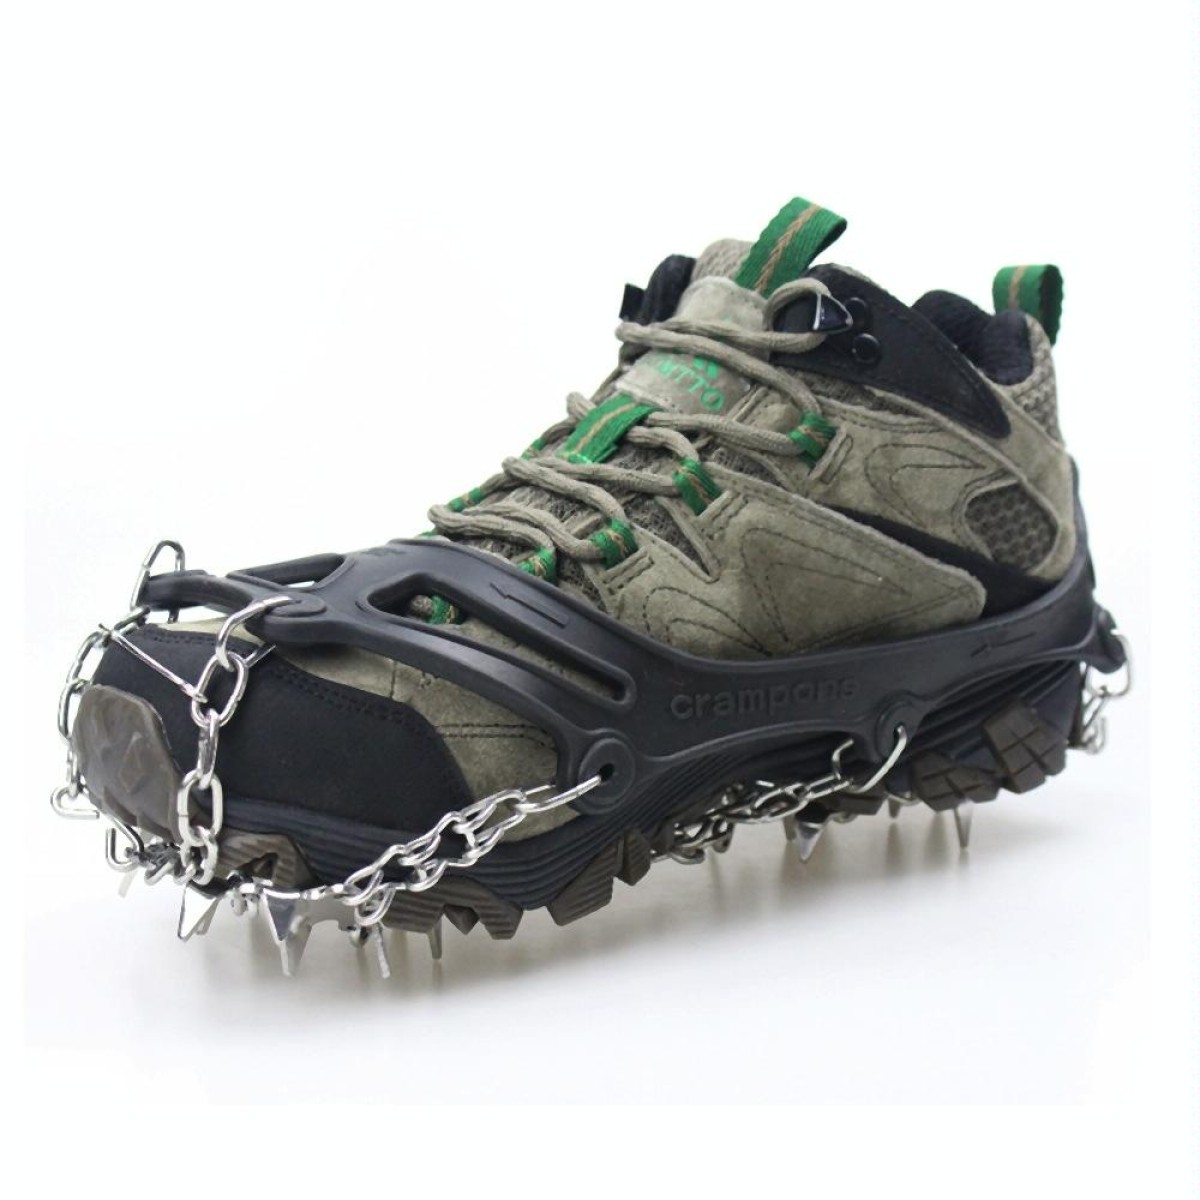 1 Pair  23 Spikes Crampons Outdoor Winter Walk Ice Fishing Snow Shoe Spikes,Size: M Black